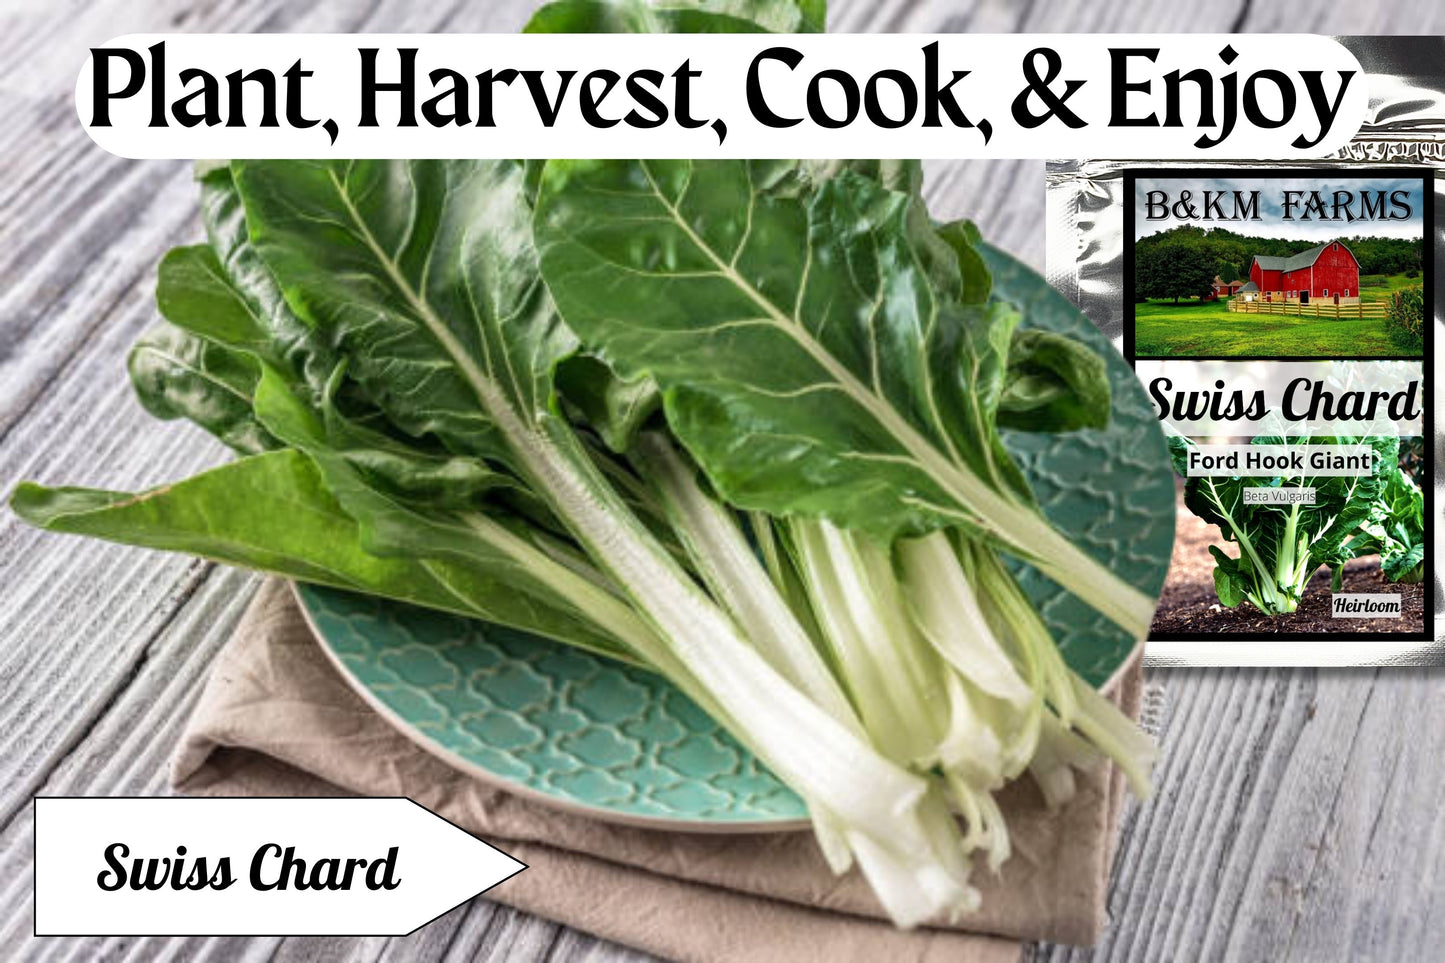 Giant Fordhook Swiss Chard: Emerald Stalks with Silver Sheen, Ready to Elevate Your Garden